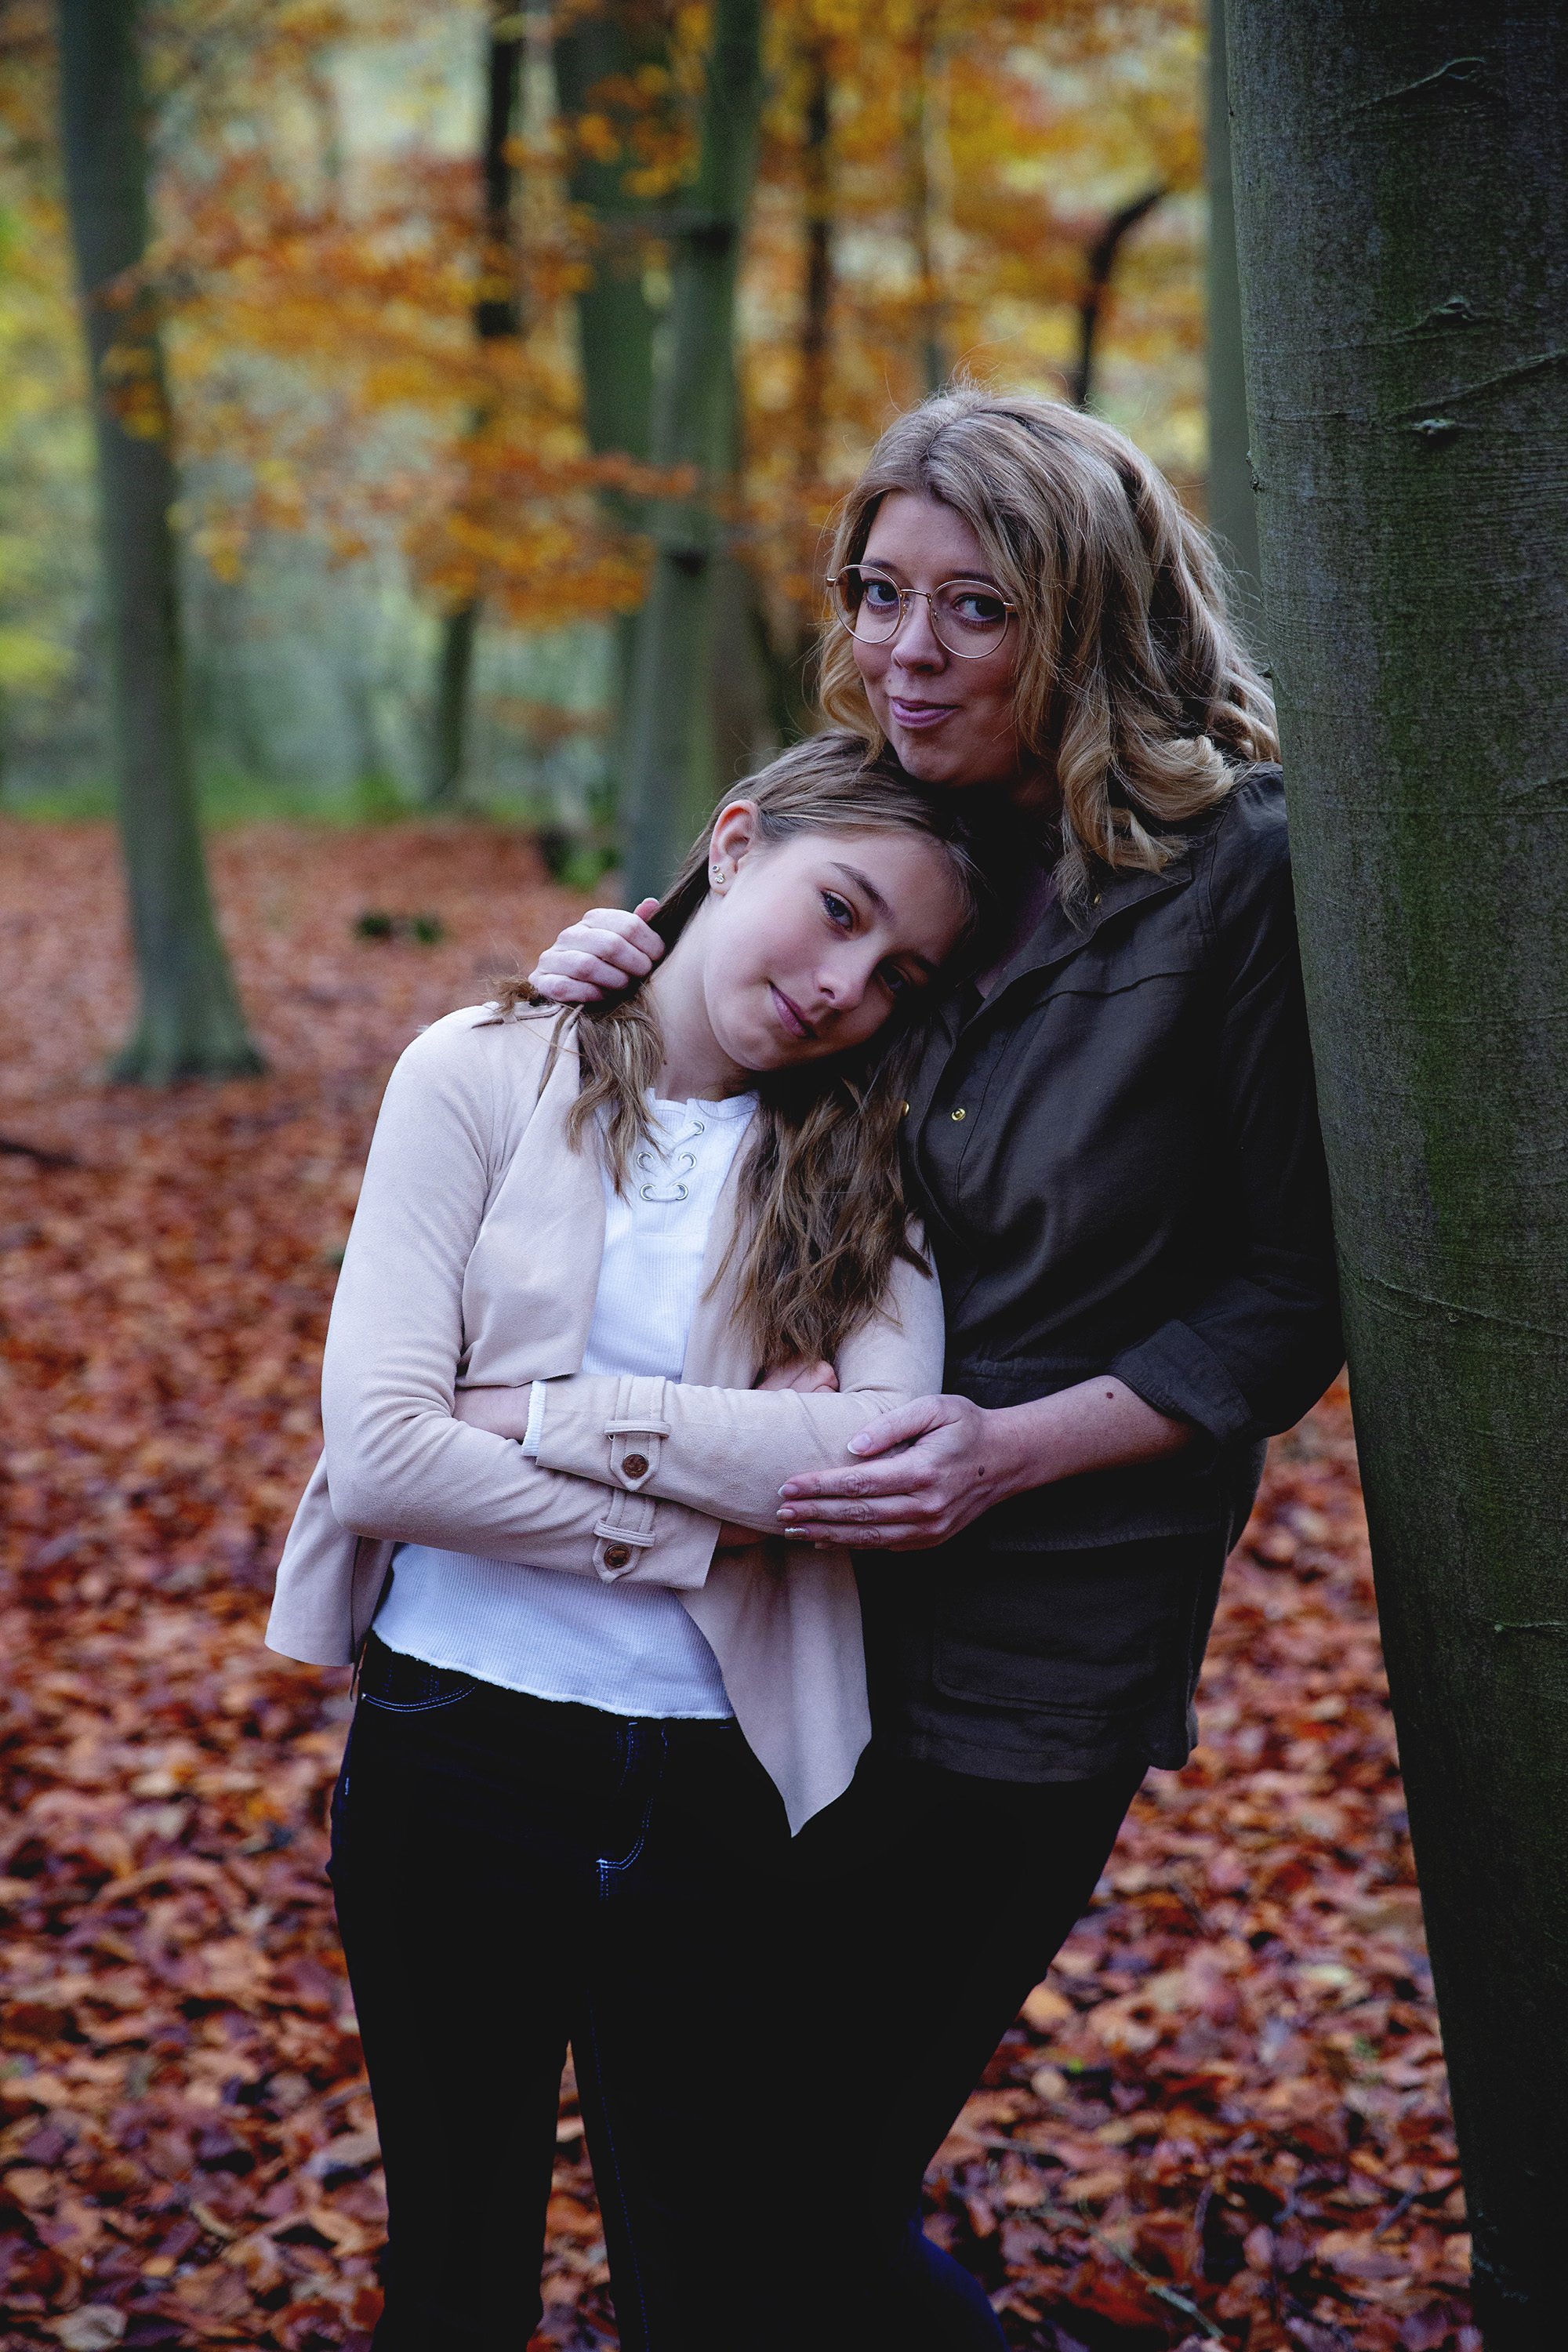 Mum and daughter in Autumn leaves